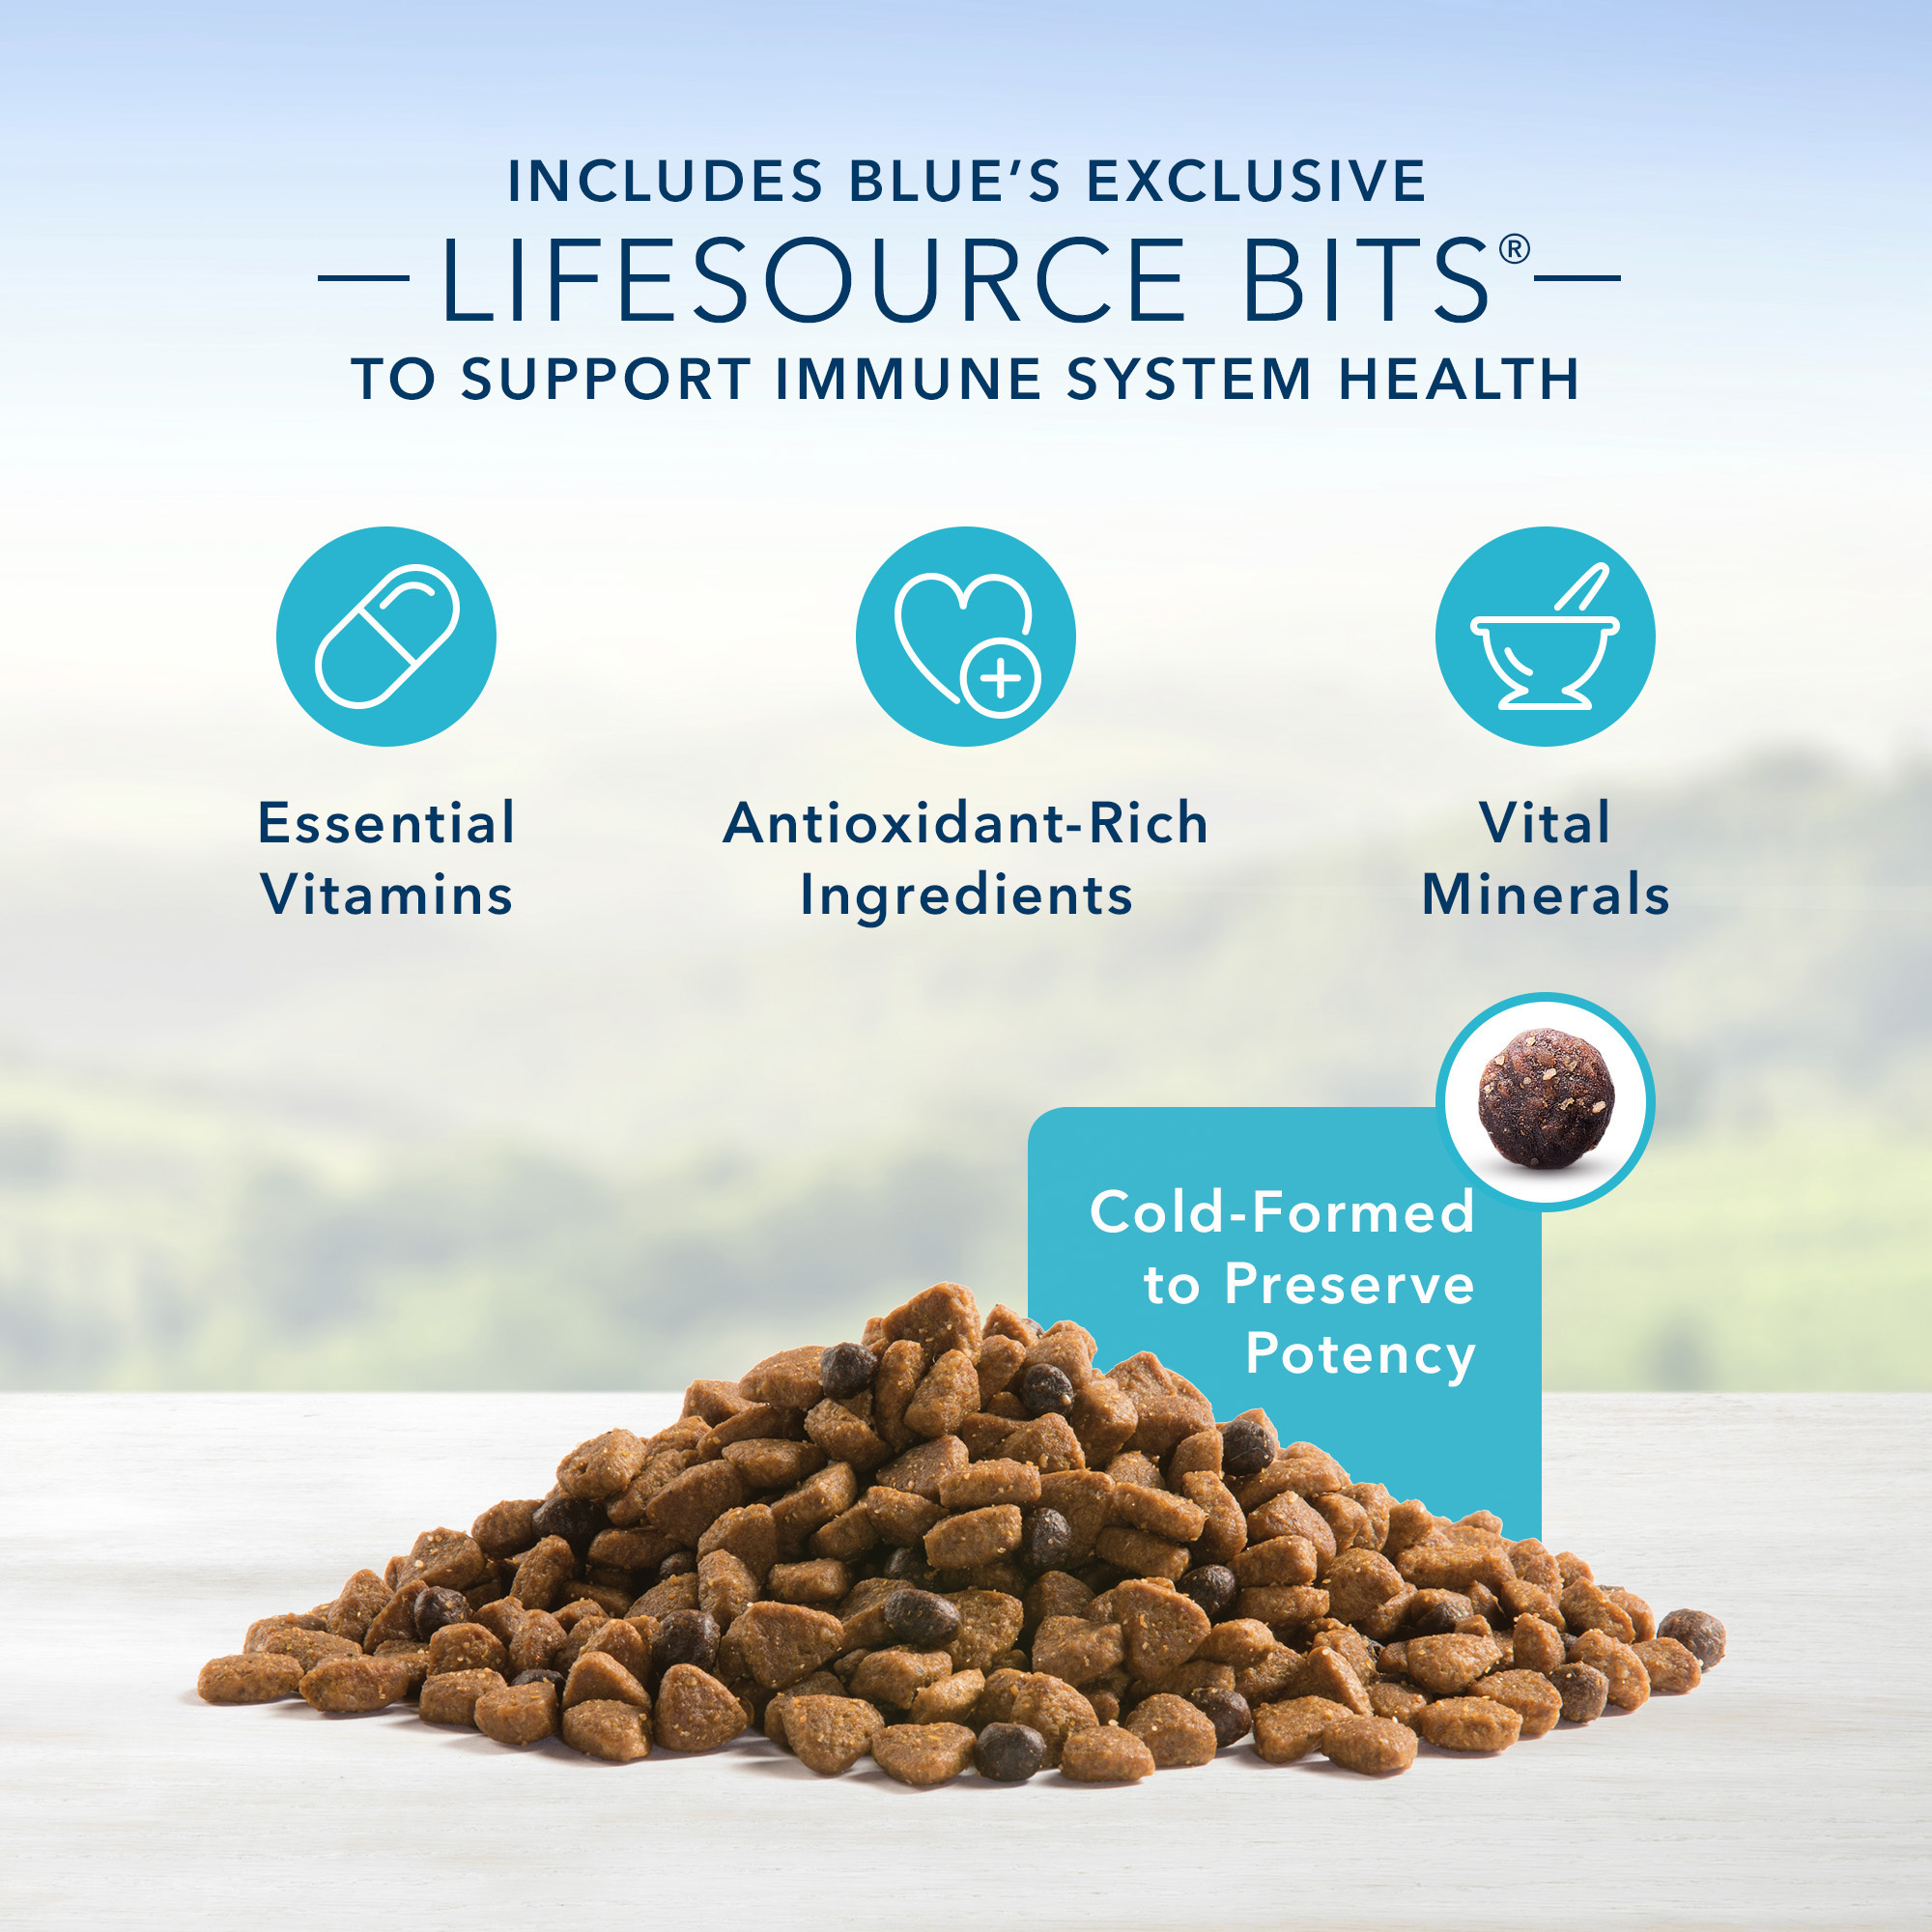 Blue Buffalo Life Protection Formula Chicken and Brown Rice Dry Dog Food for Puppies, Whole Grain, 30 lb. Bag - image 3 of 11